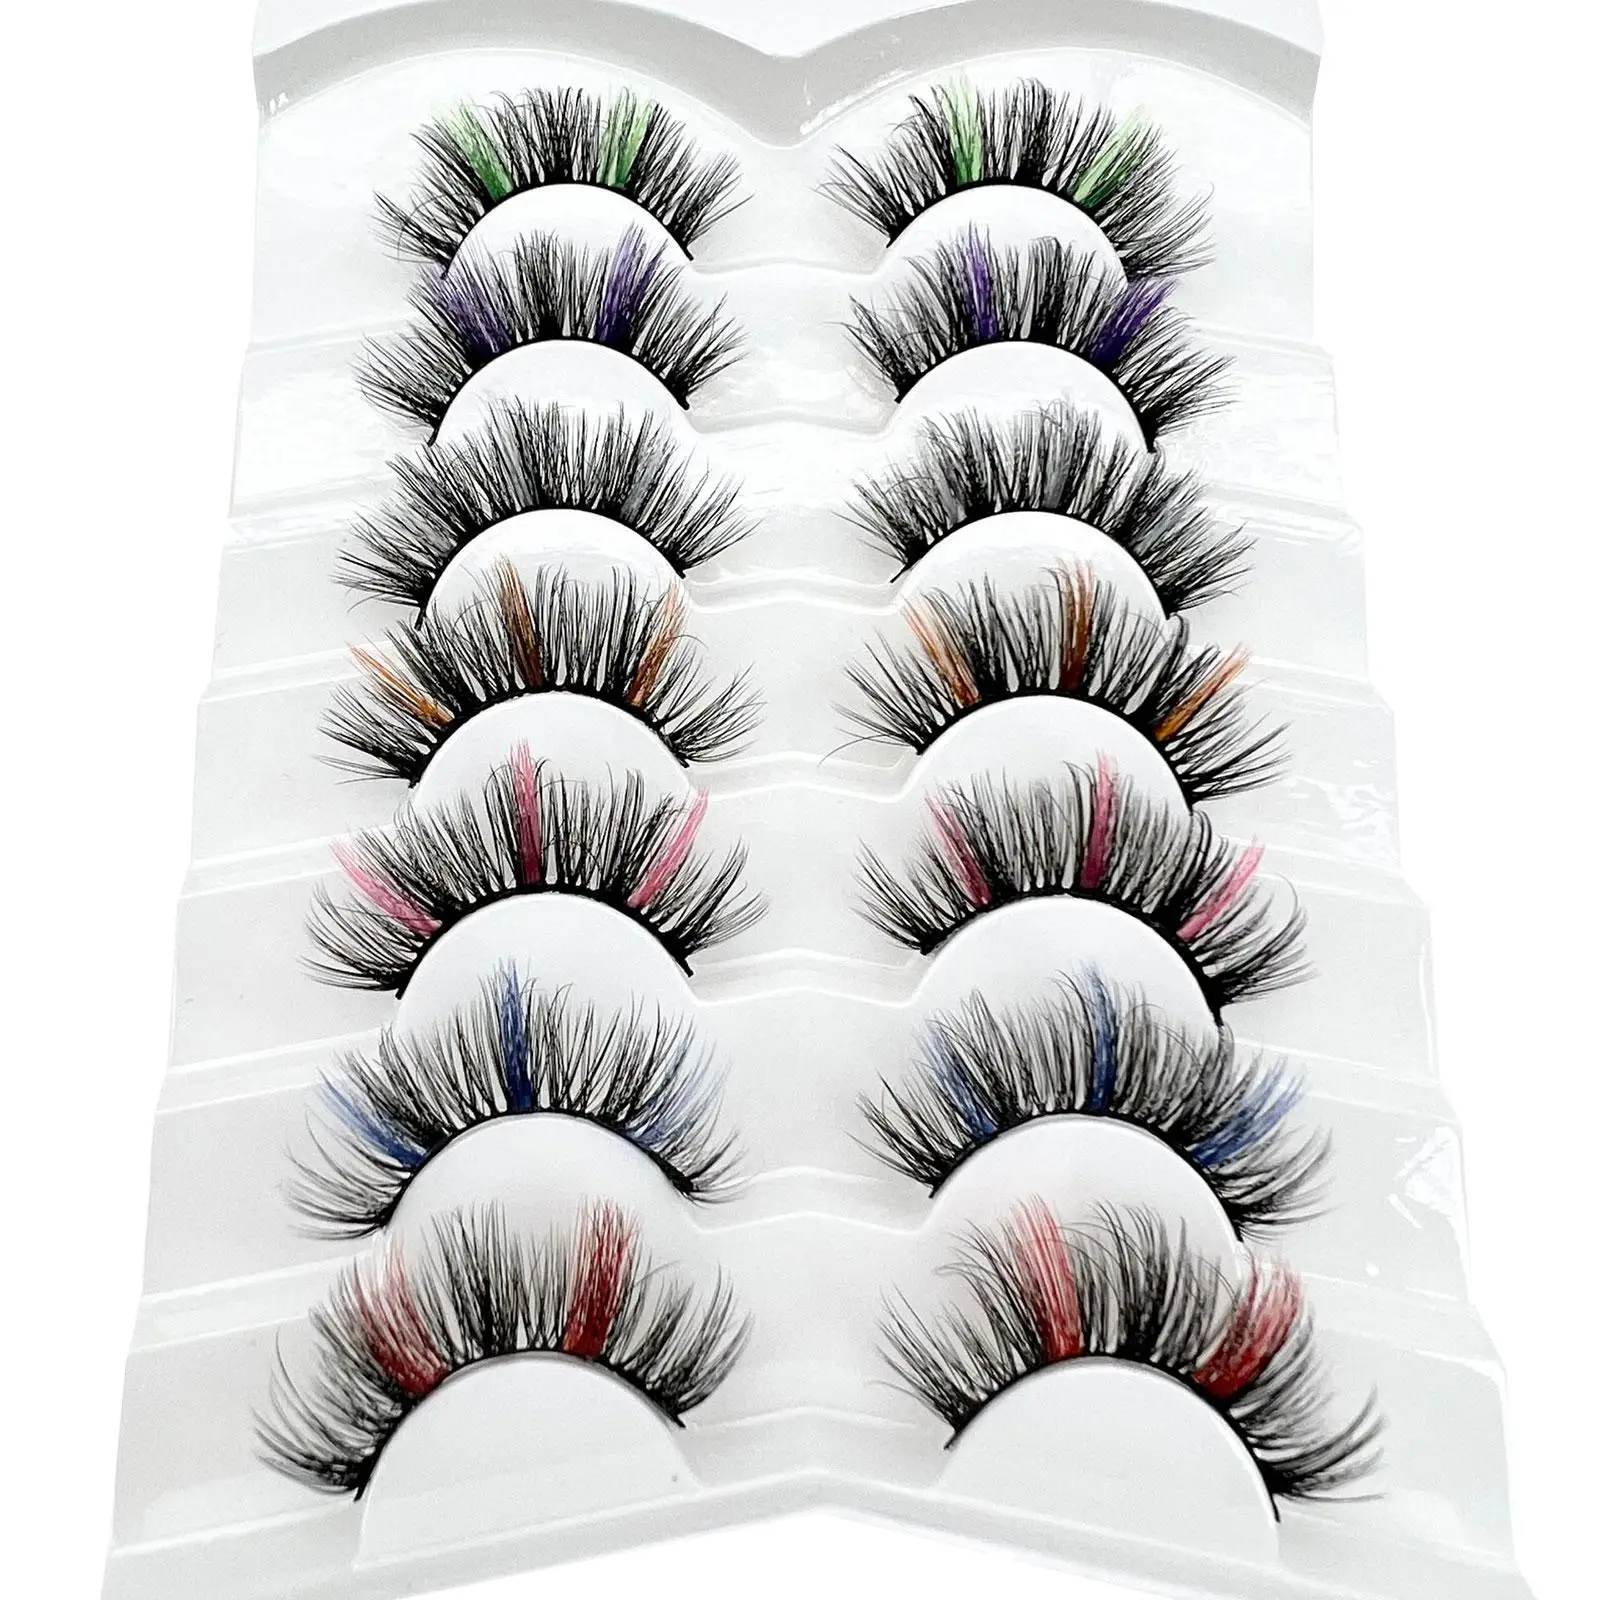 14Pieces Colored Lashes Natural Look Fake Eyelashes Soft Natural Long False Lashes with Color for Thanksgiving Cosplay